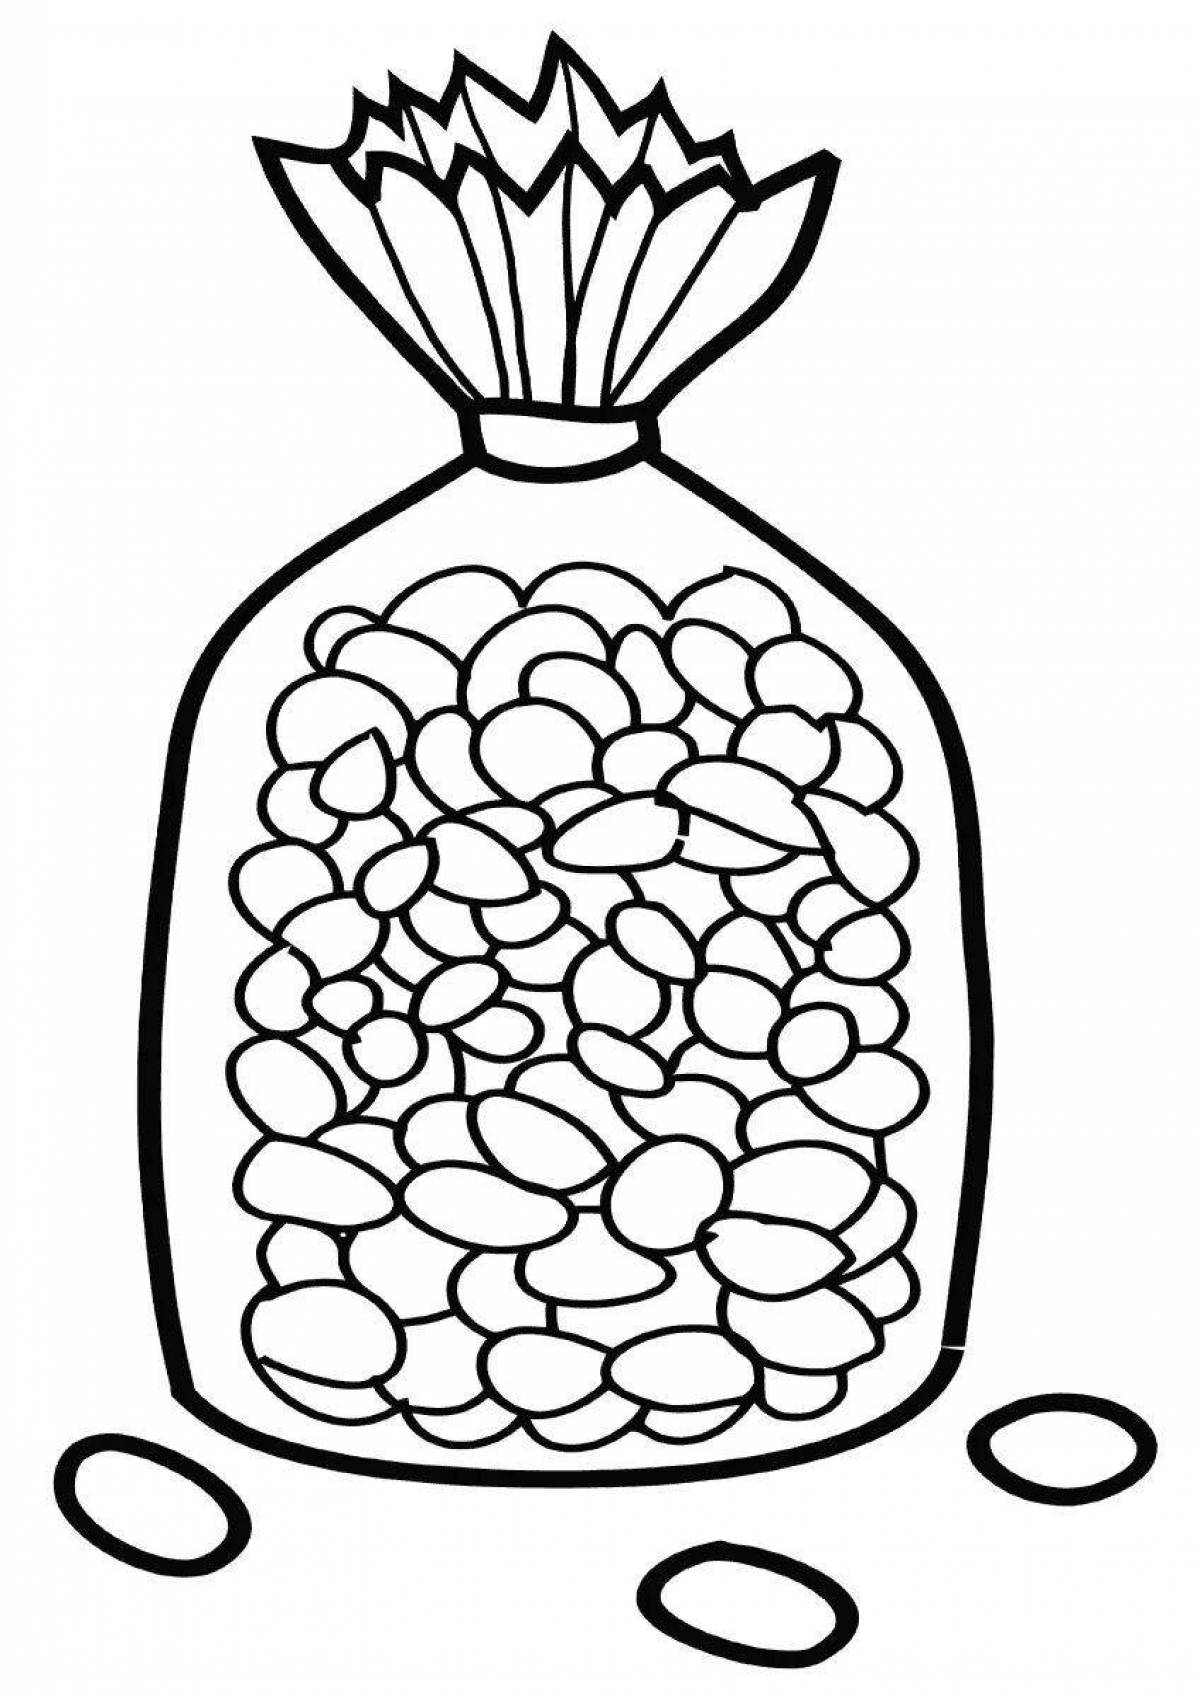 Adorable grain coloring page for kids